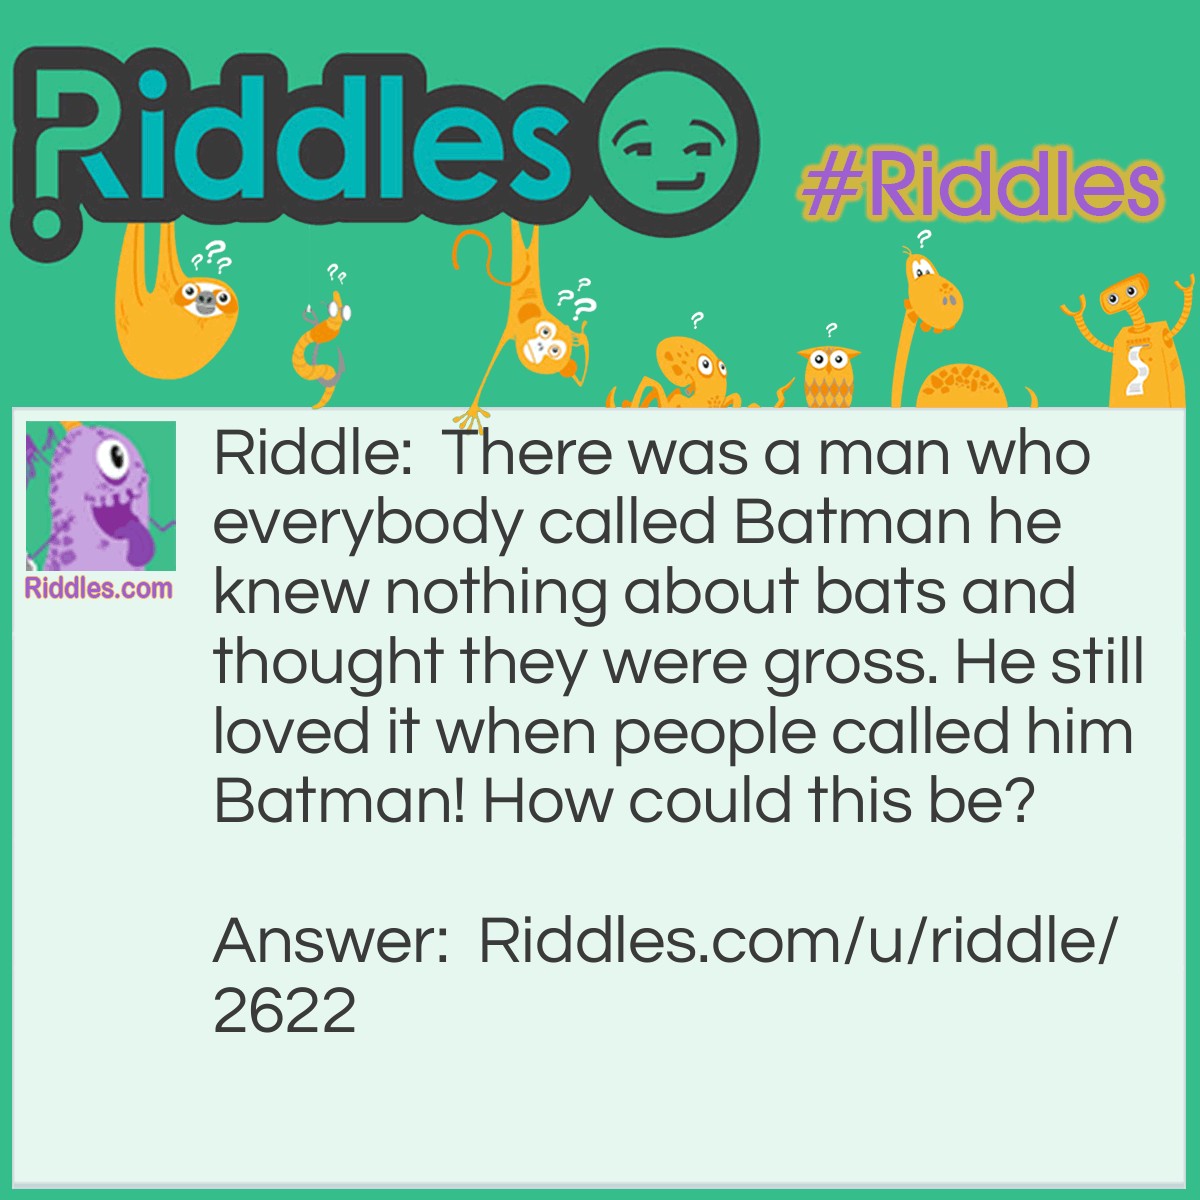 Riddle: There was a man who everybody called Batman he knew nothing about bats and thought they were gross. He still loved it when people called him Batman! How could this be? Answer: He was the star baseball player!